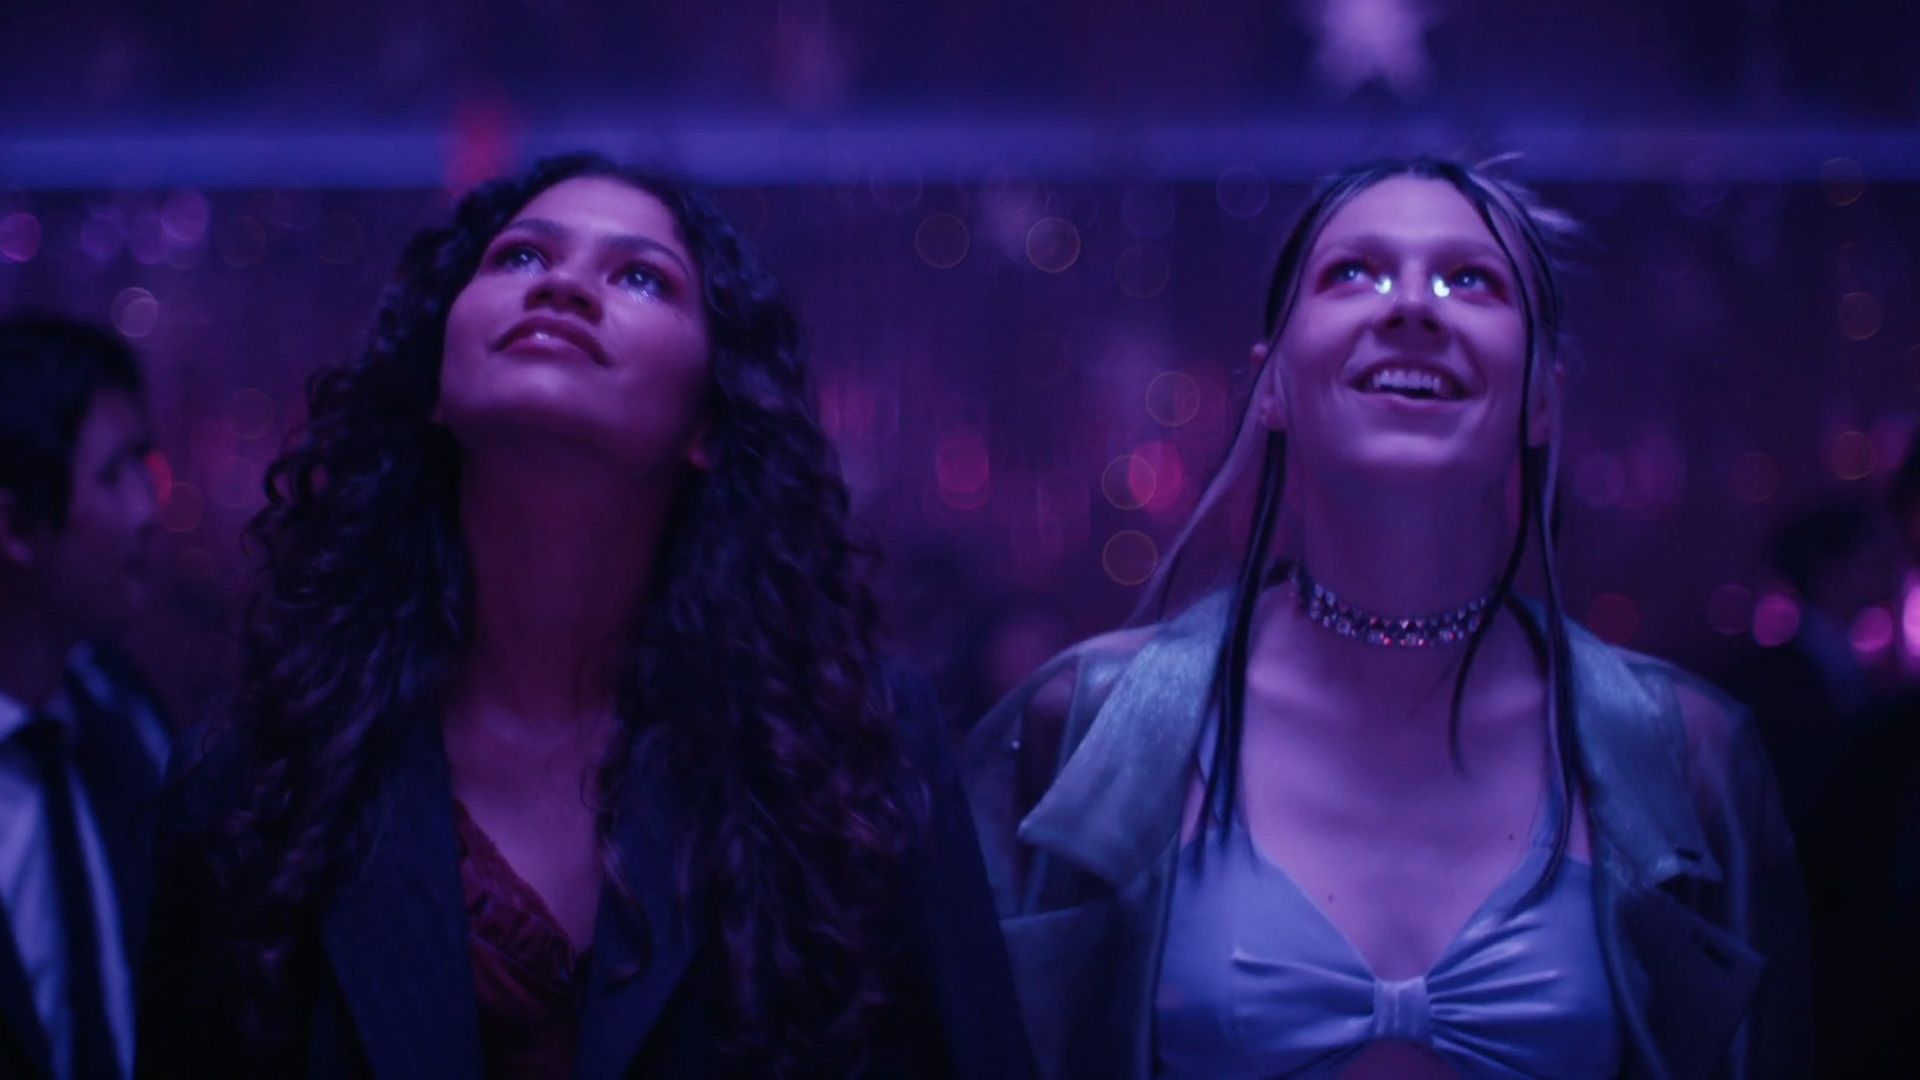 Euphoria Season 1 Ending Explained: Here's What Happens To Each Character?